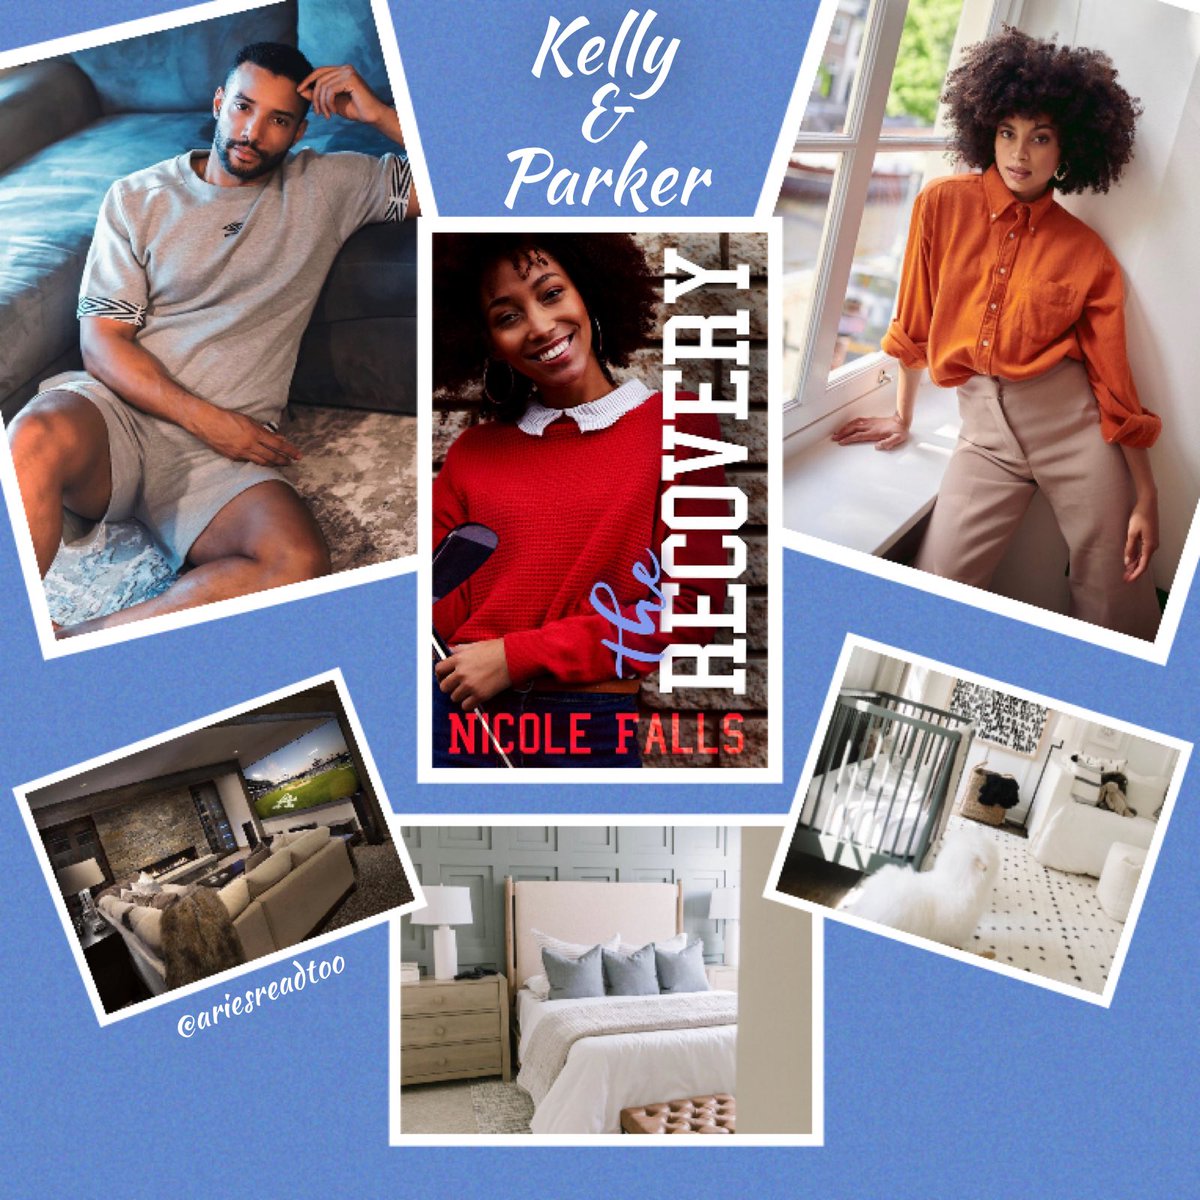 Kelly and Parker are very hot, their chemistry jumps off the page! Kelly gives me foine grown man, it’s the DILF in him Parker is headstrong, hardworking & nurturing it’s no surprise that Kelly can’t resist her. But she’s also guarded, too bad K is a bit irresistible himself 